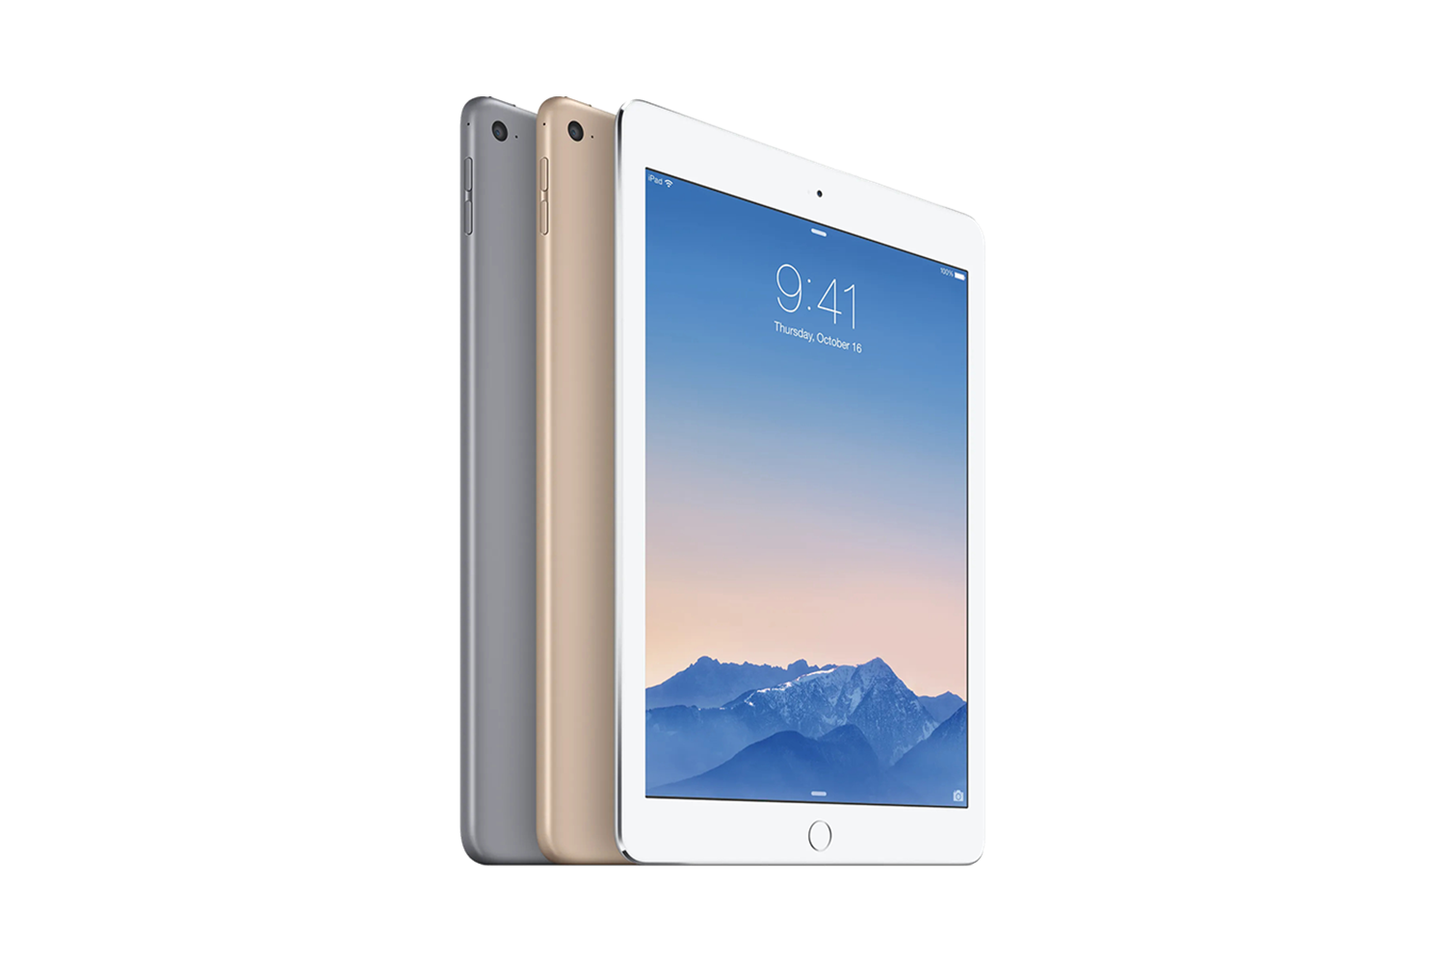 iPad Air 2 Wifi+Cellulaire